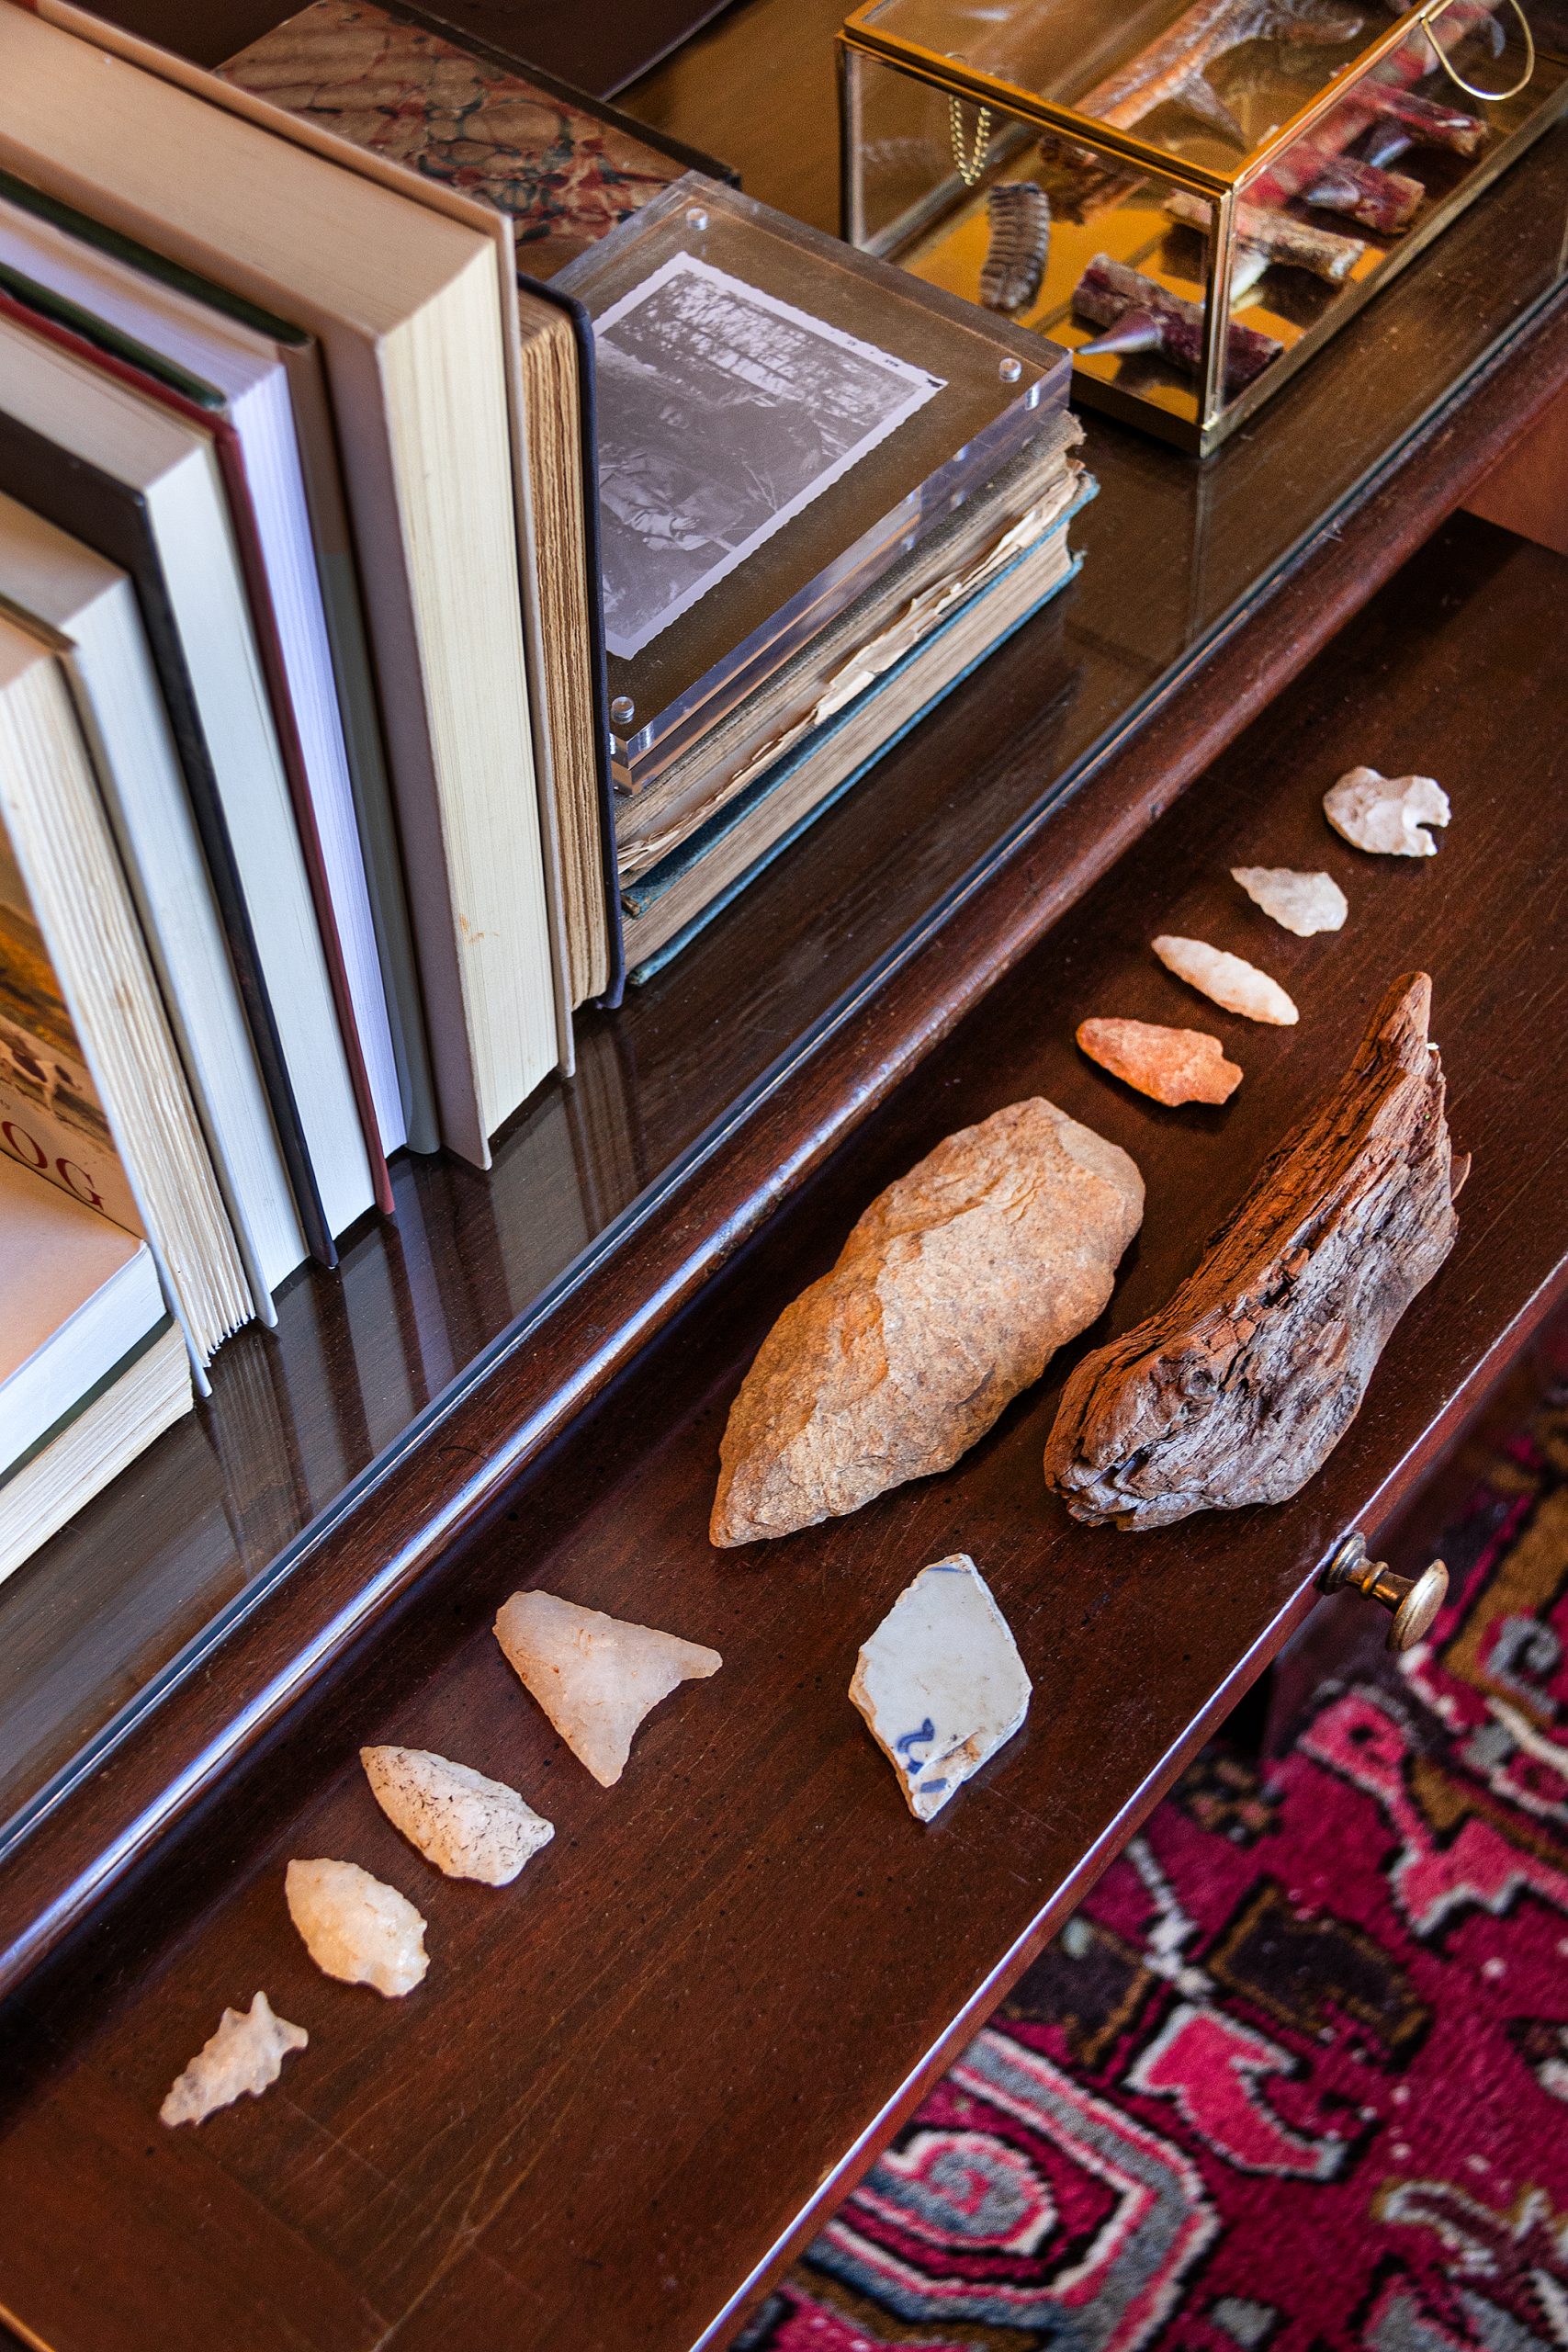 Allan’s office is a visual history of the treasures he has collected on his outdoor explorations; the arrowheads are just an example of his many passions!